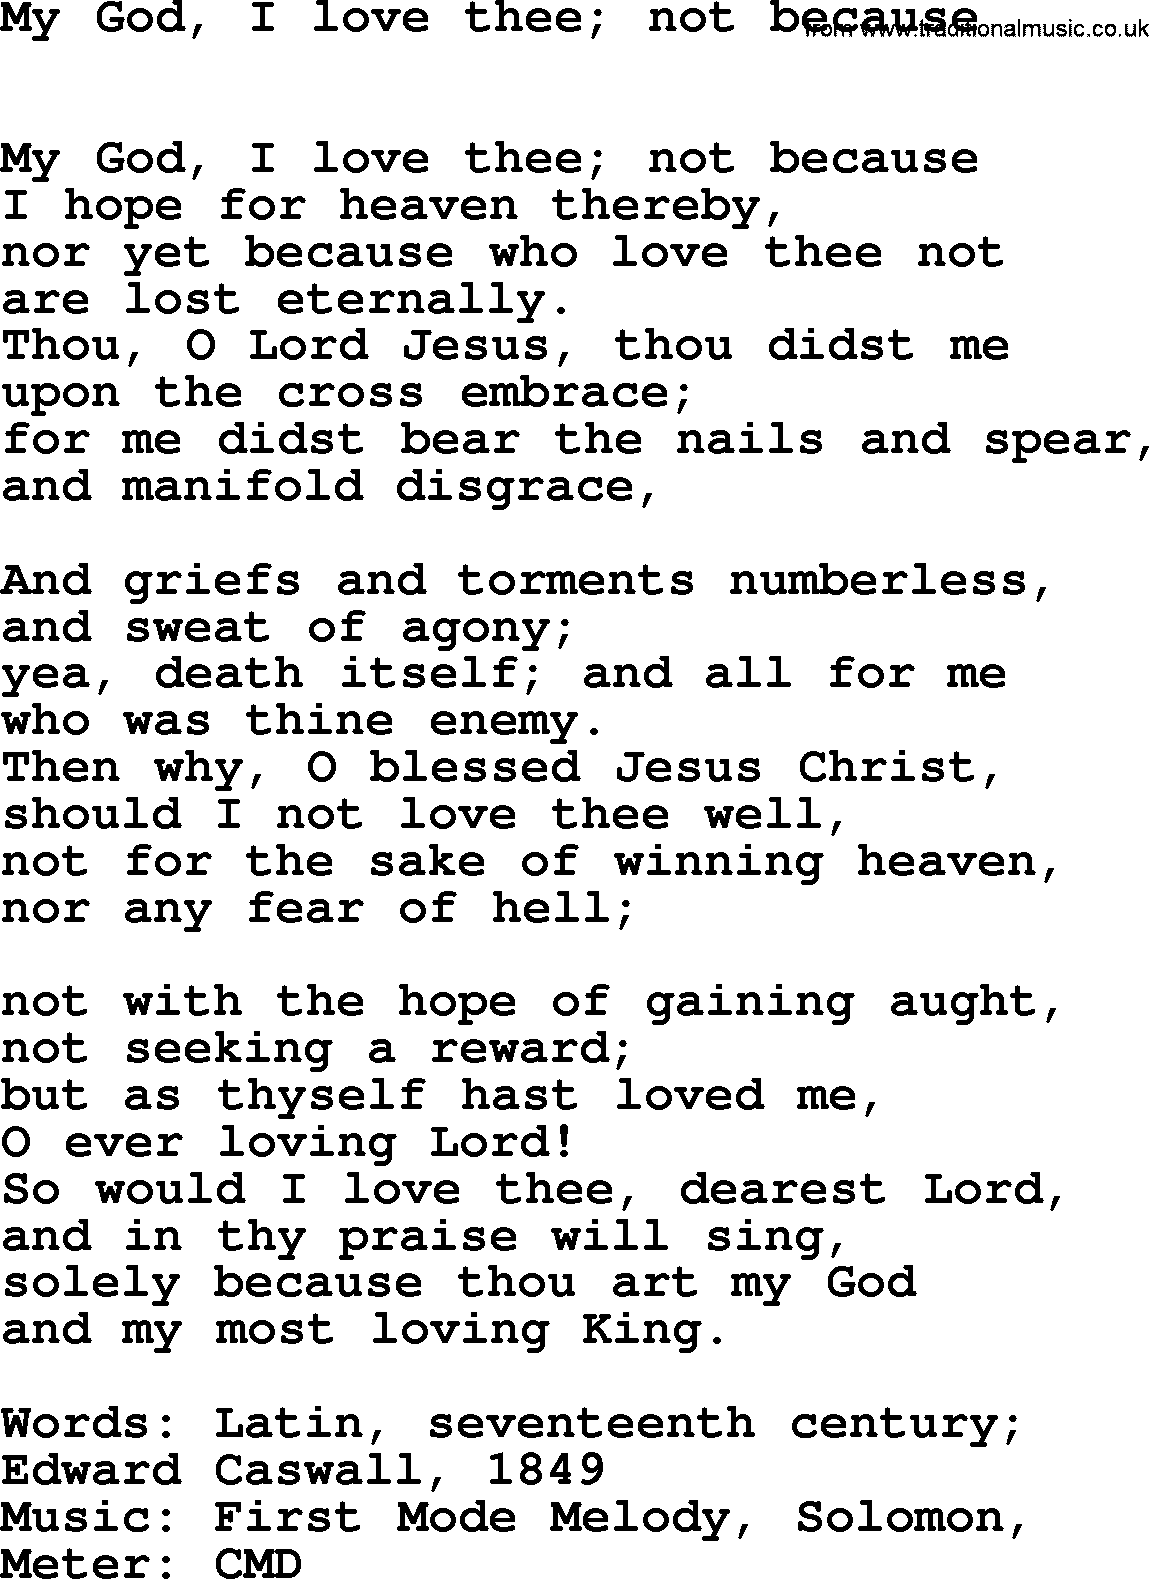 Book of Common Praise Hymn: My God, I Love Thee; Not Because.txt lyrics with midi music